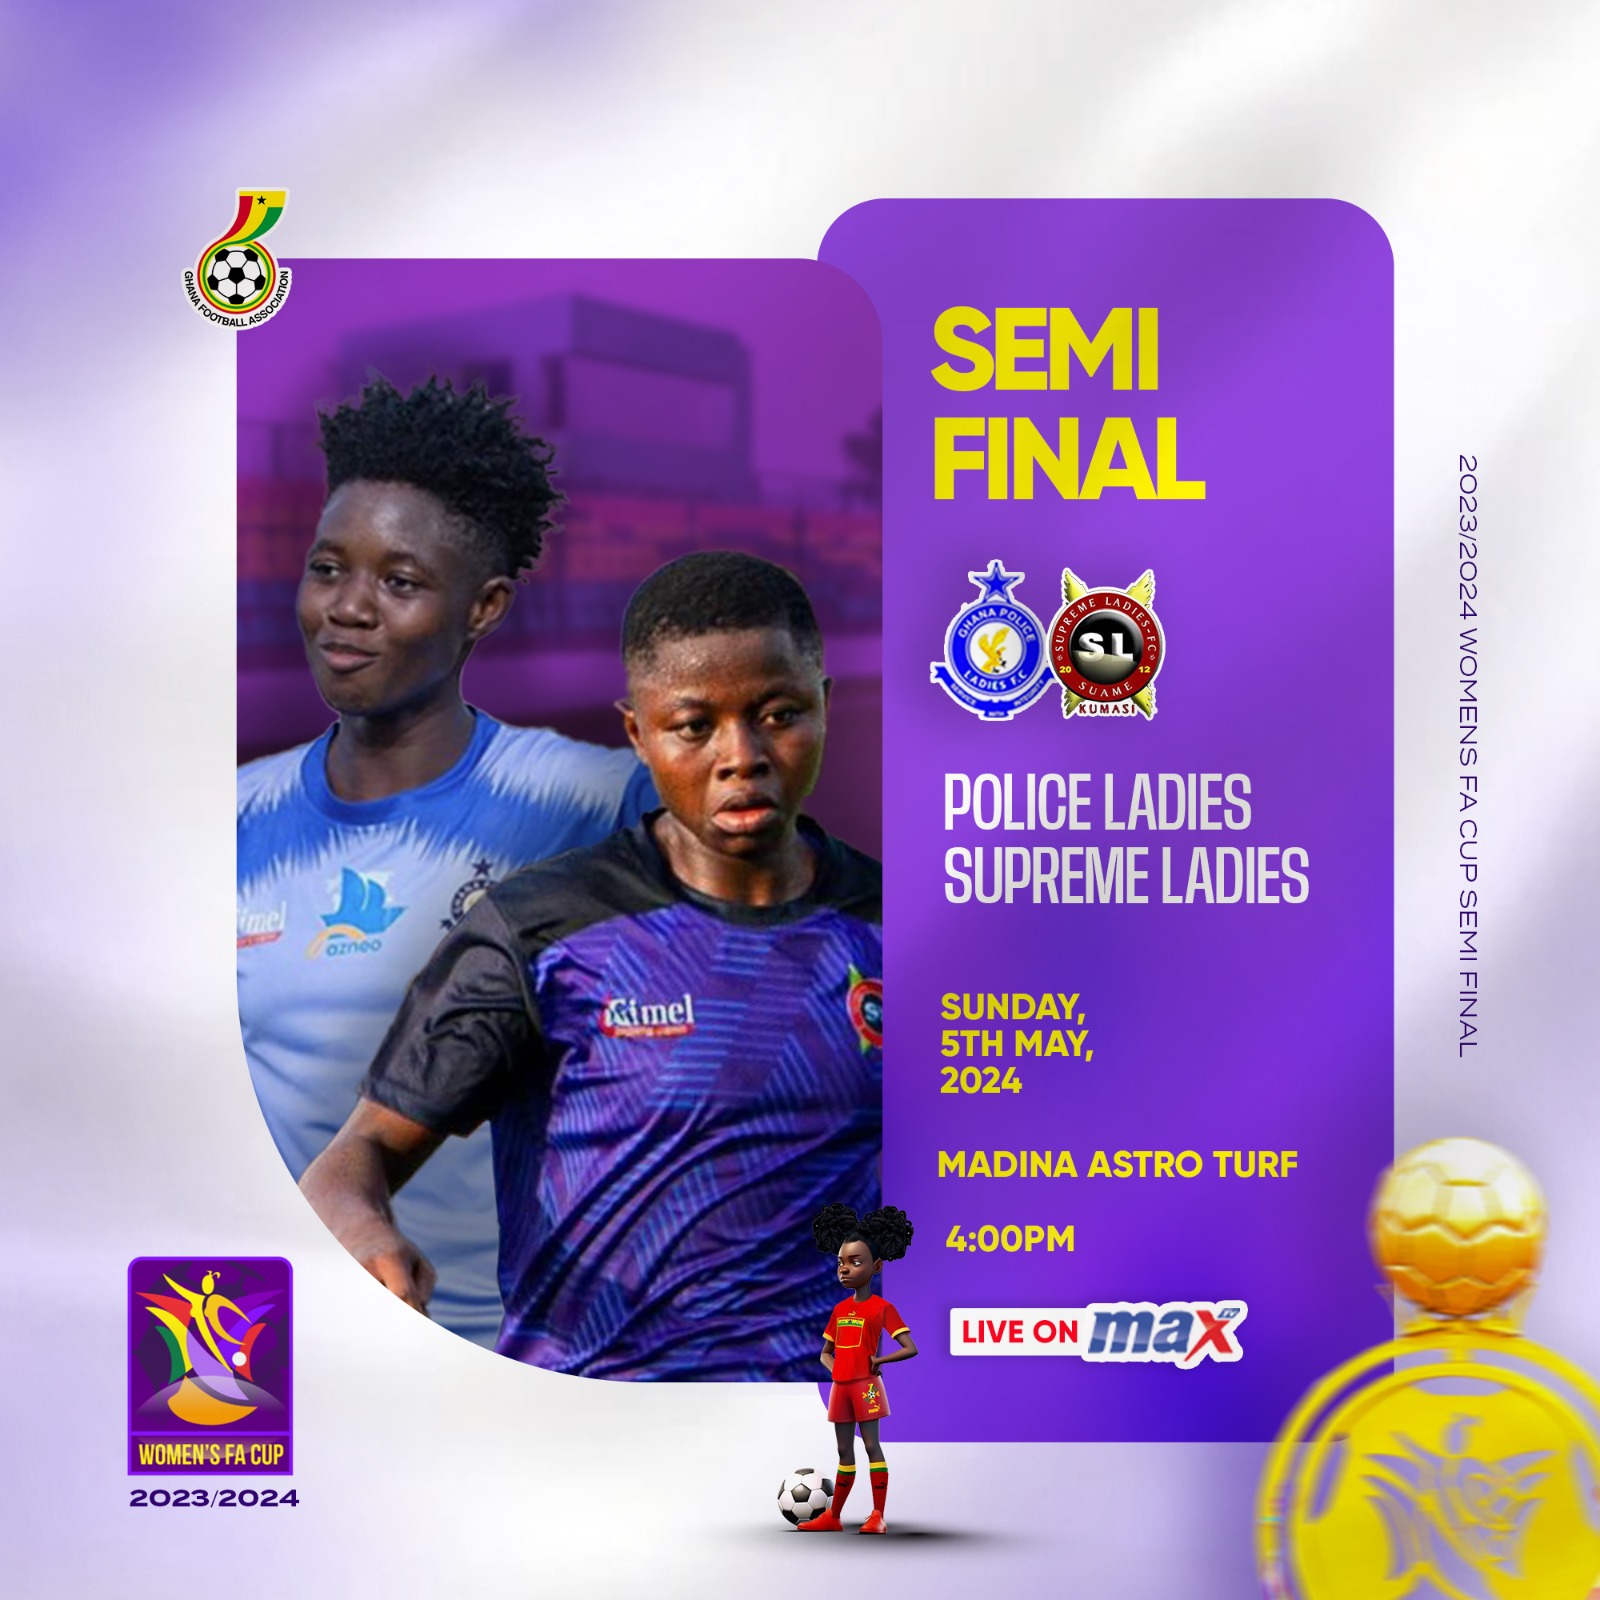 Police Ladies face off with Supreme Ladies in Women's FA Cup semis